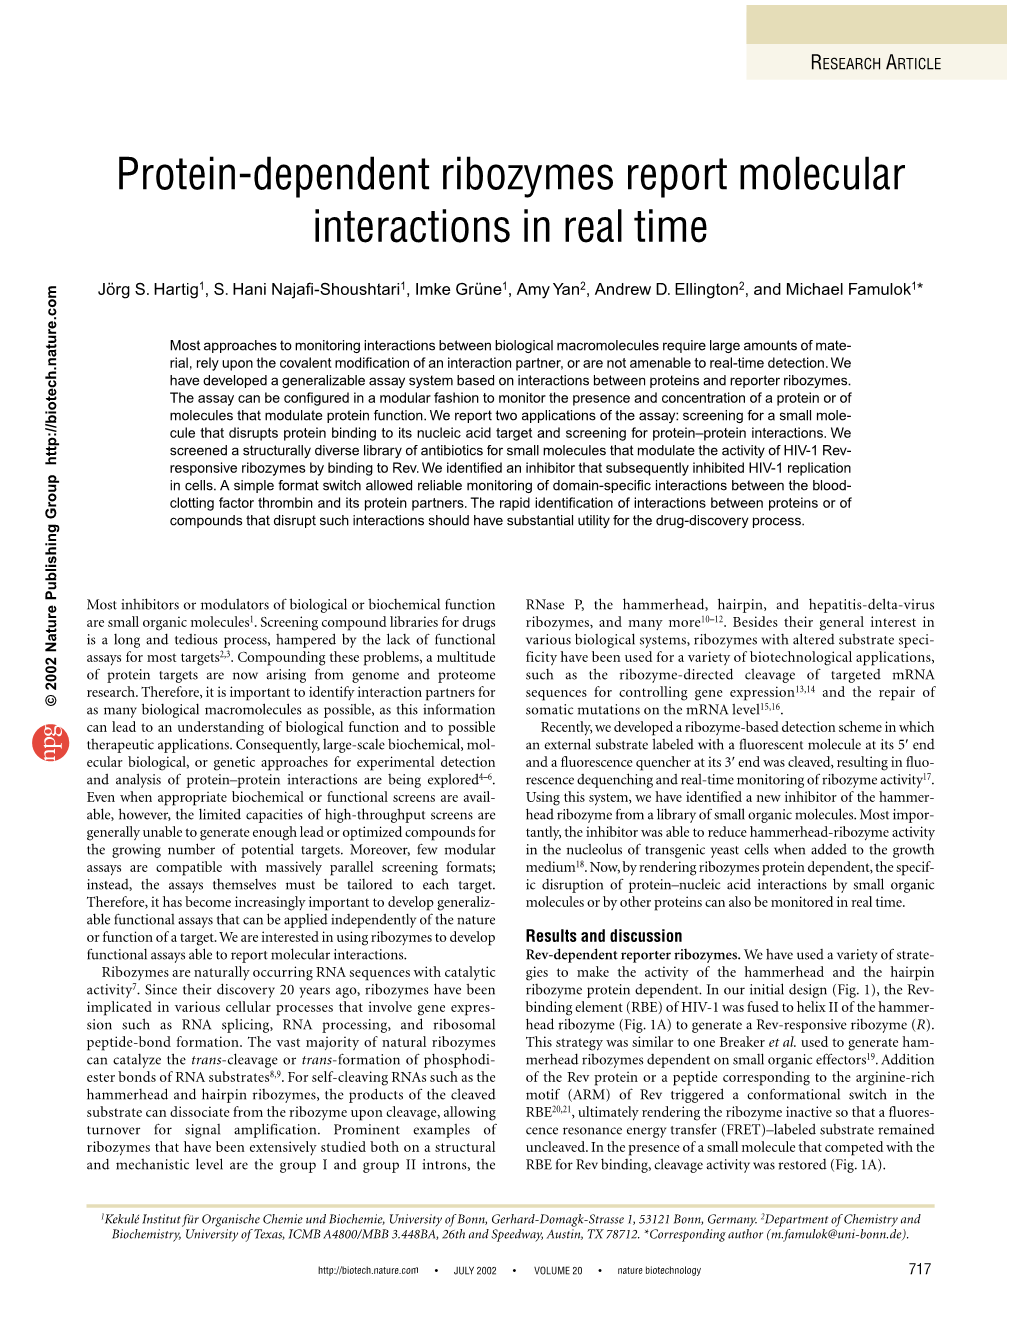 Protein-Dependent Ribozymes Report Molecular Interactions in Real Time